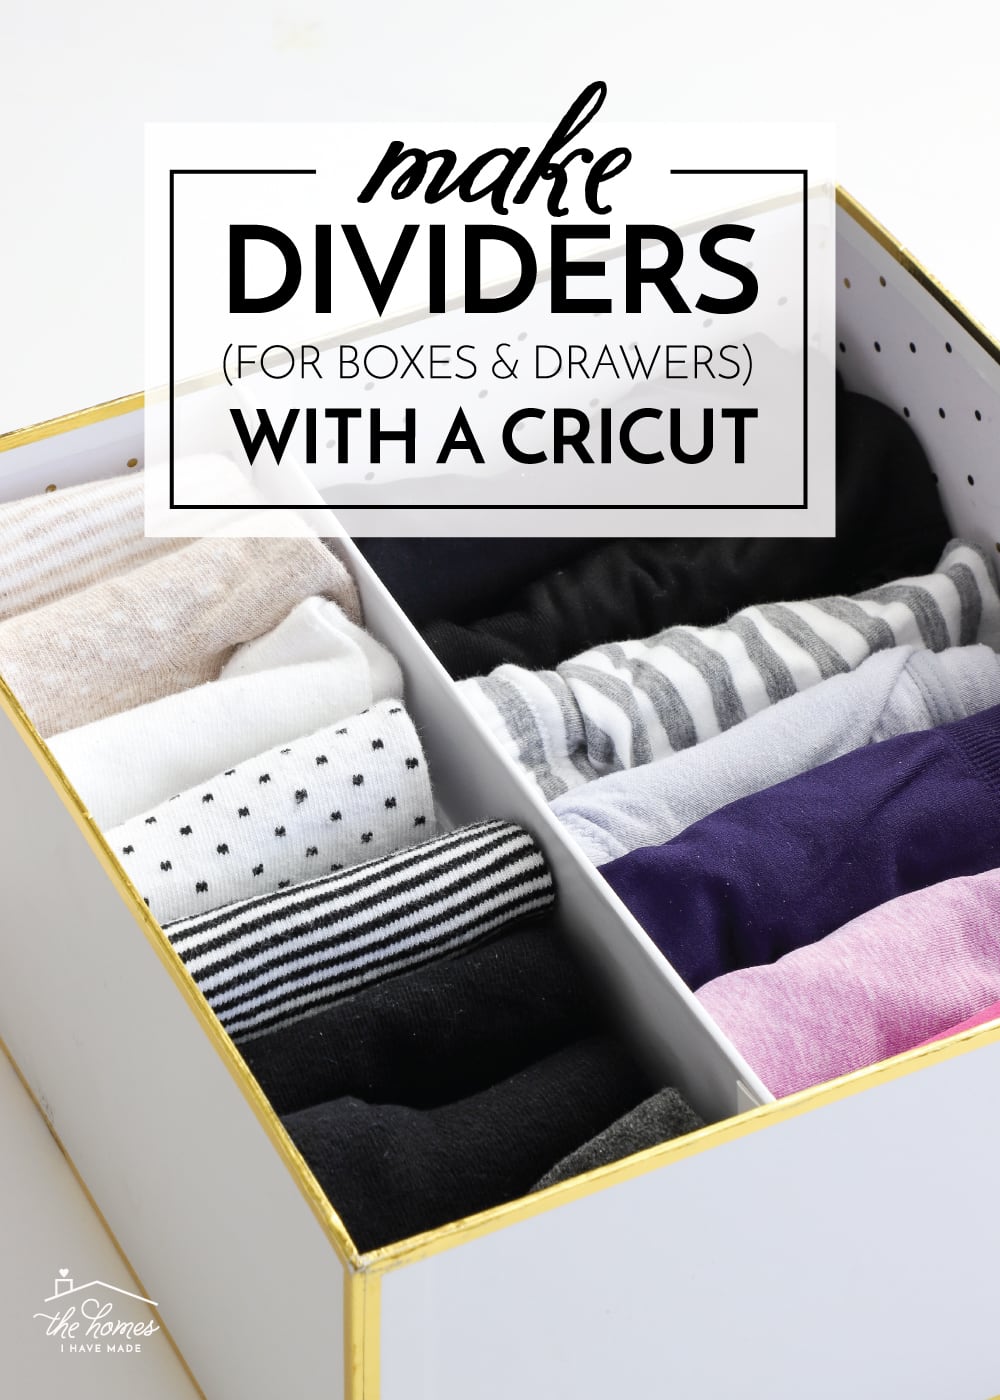 Drawer Dividers With a Cricut